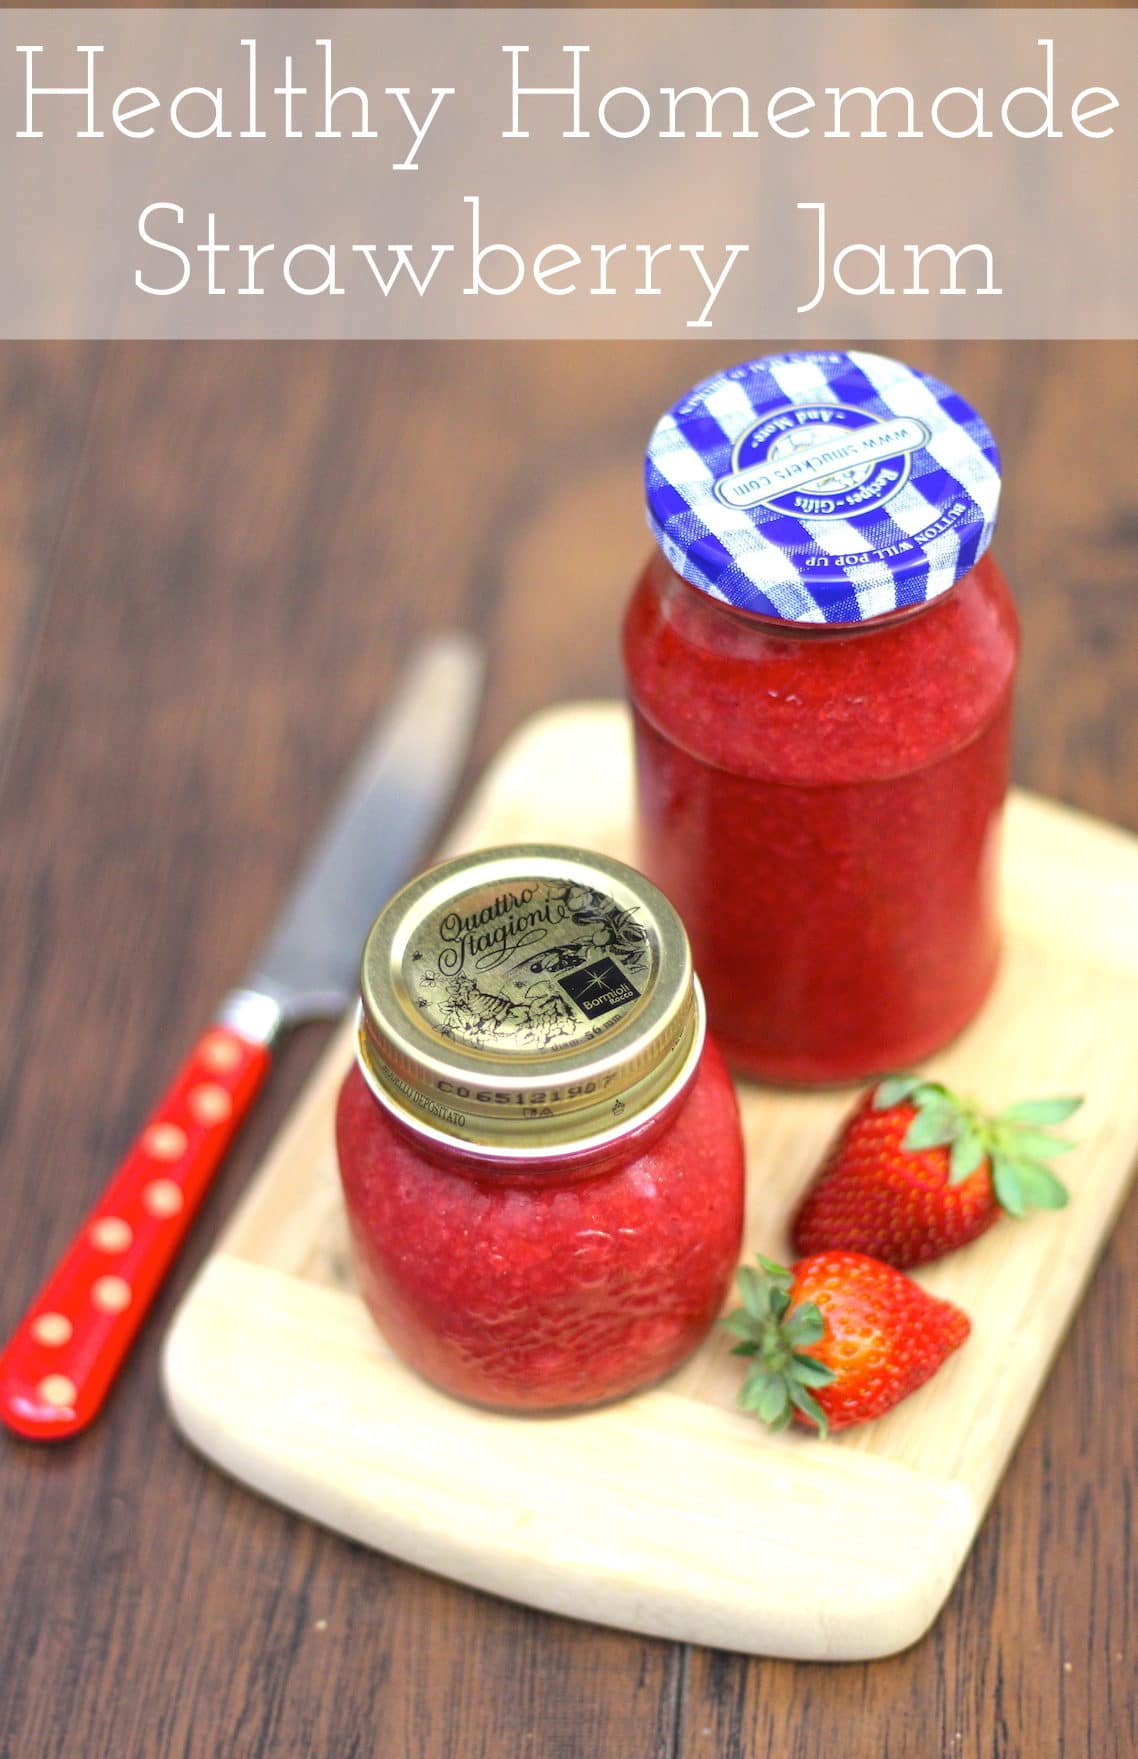 This Healthy Homemade Sugar Free Strawberry Jam is made with sweet, fresh strawberries, and none of the added sugar or corn syrup. It's perfect on toast!